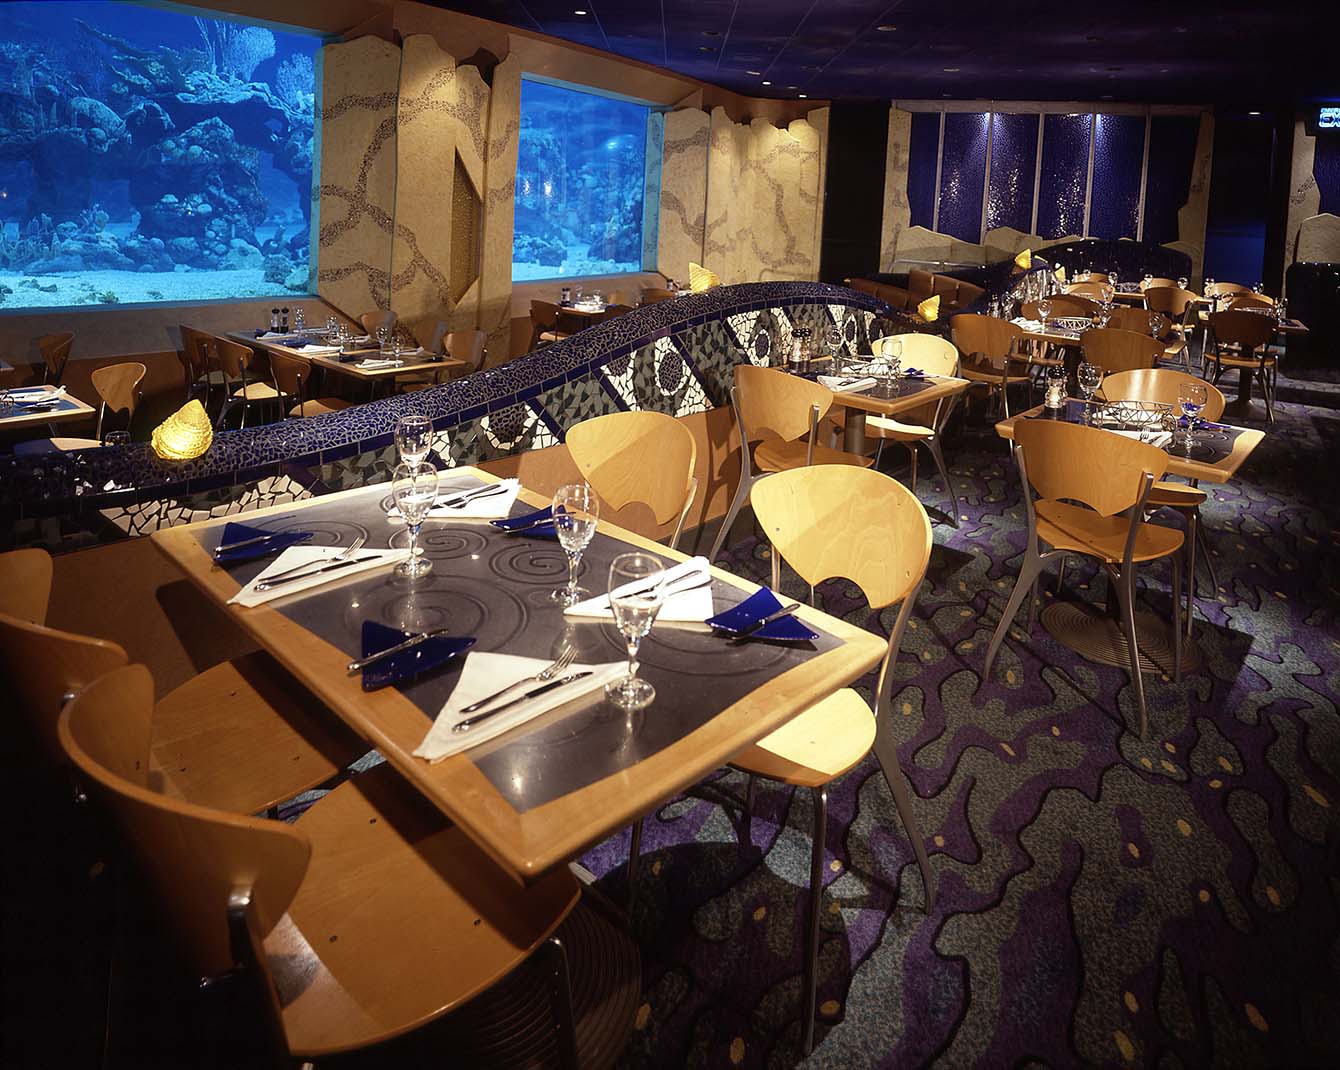 Coral Reef Restaurant is part of Epcot's Living Seas attraction. Photo courtesy of Disney.